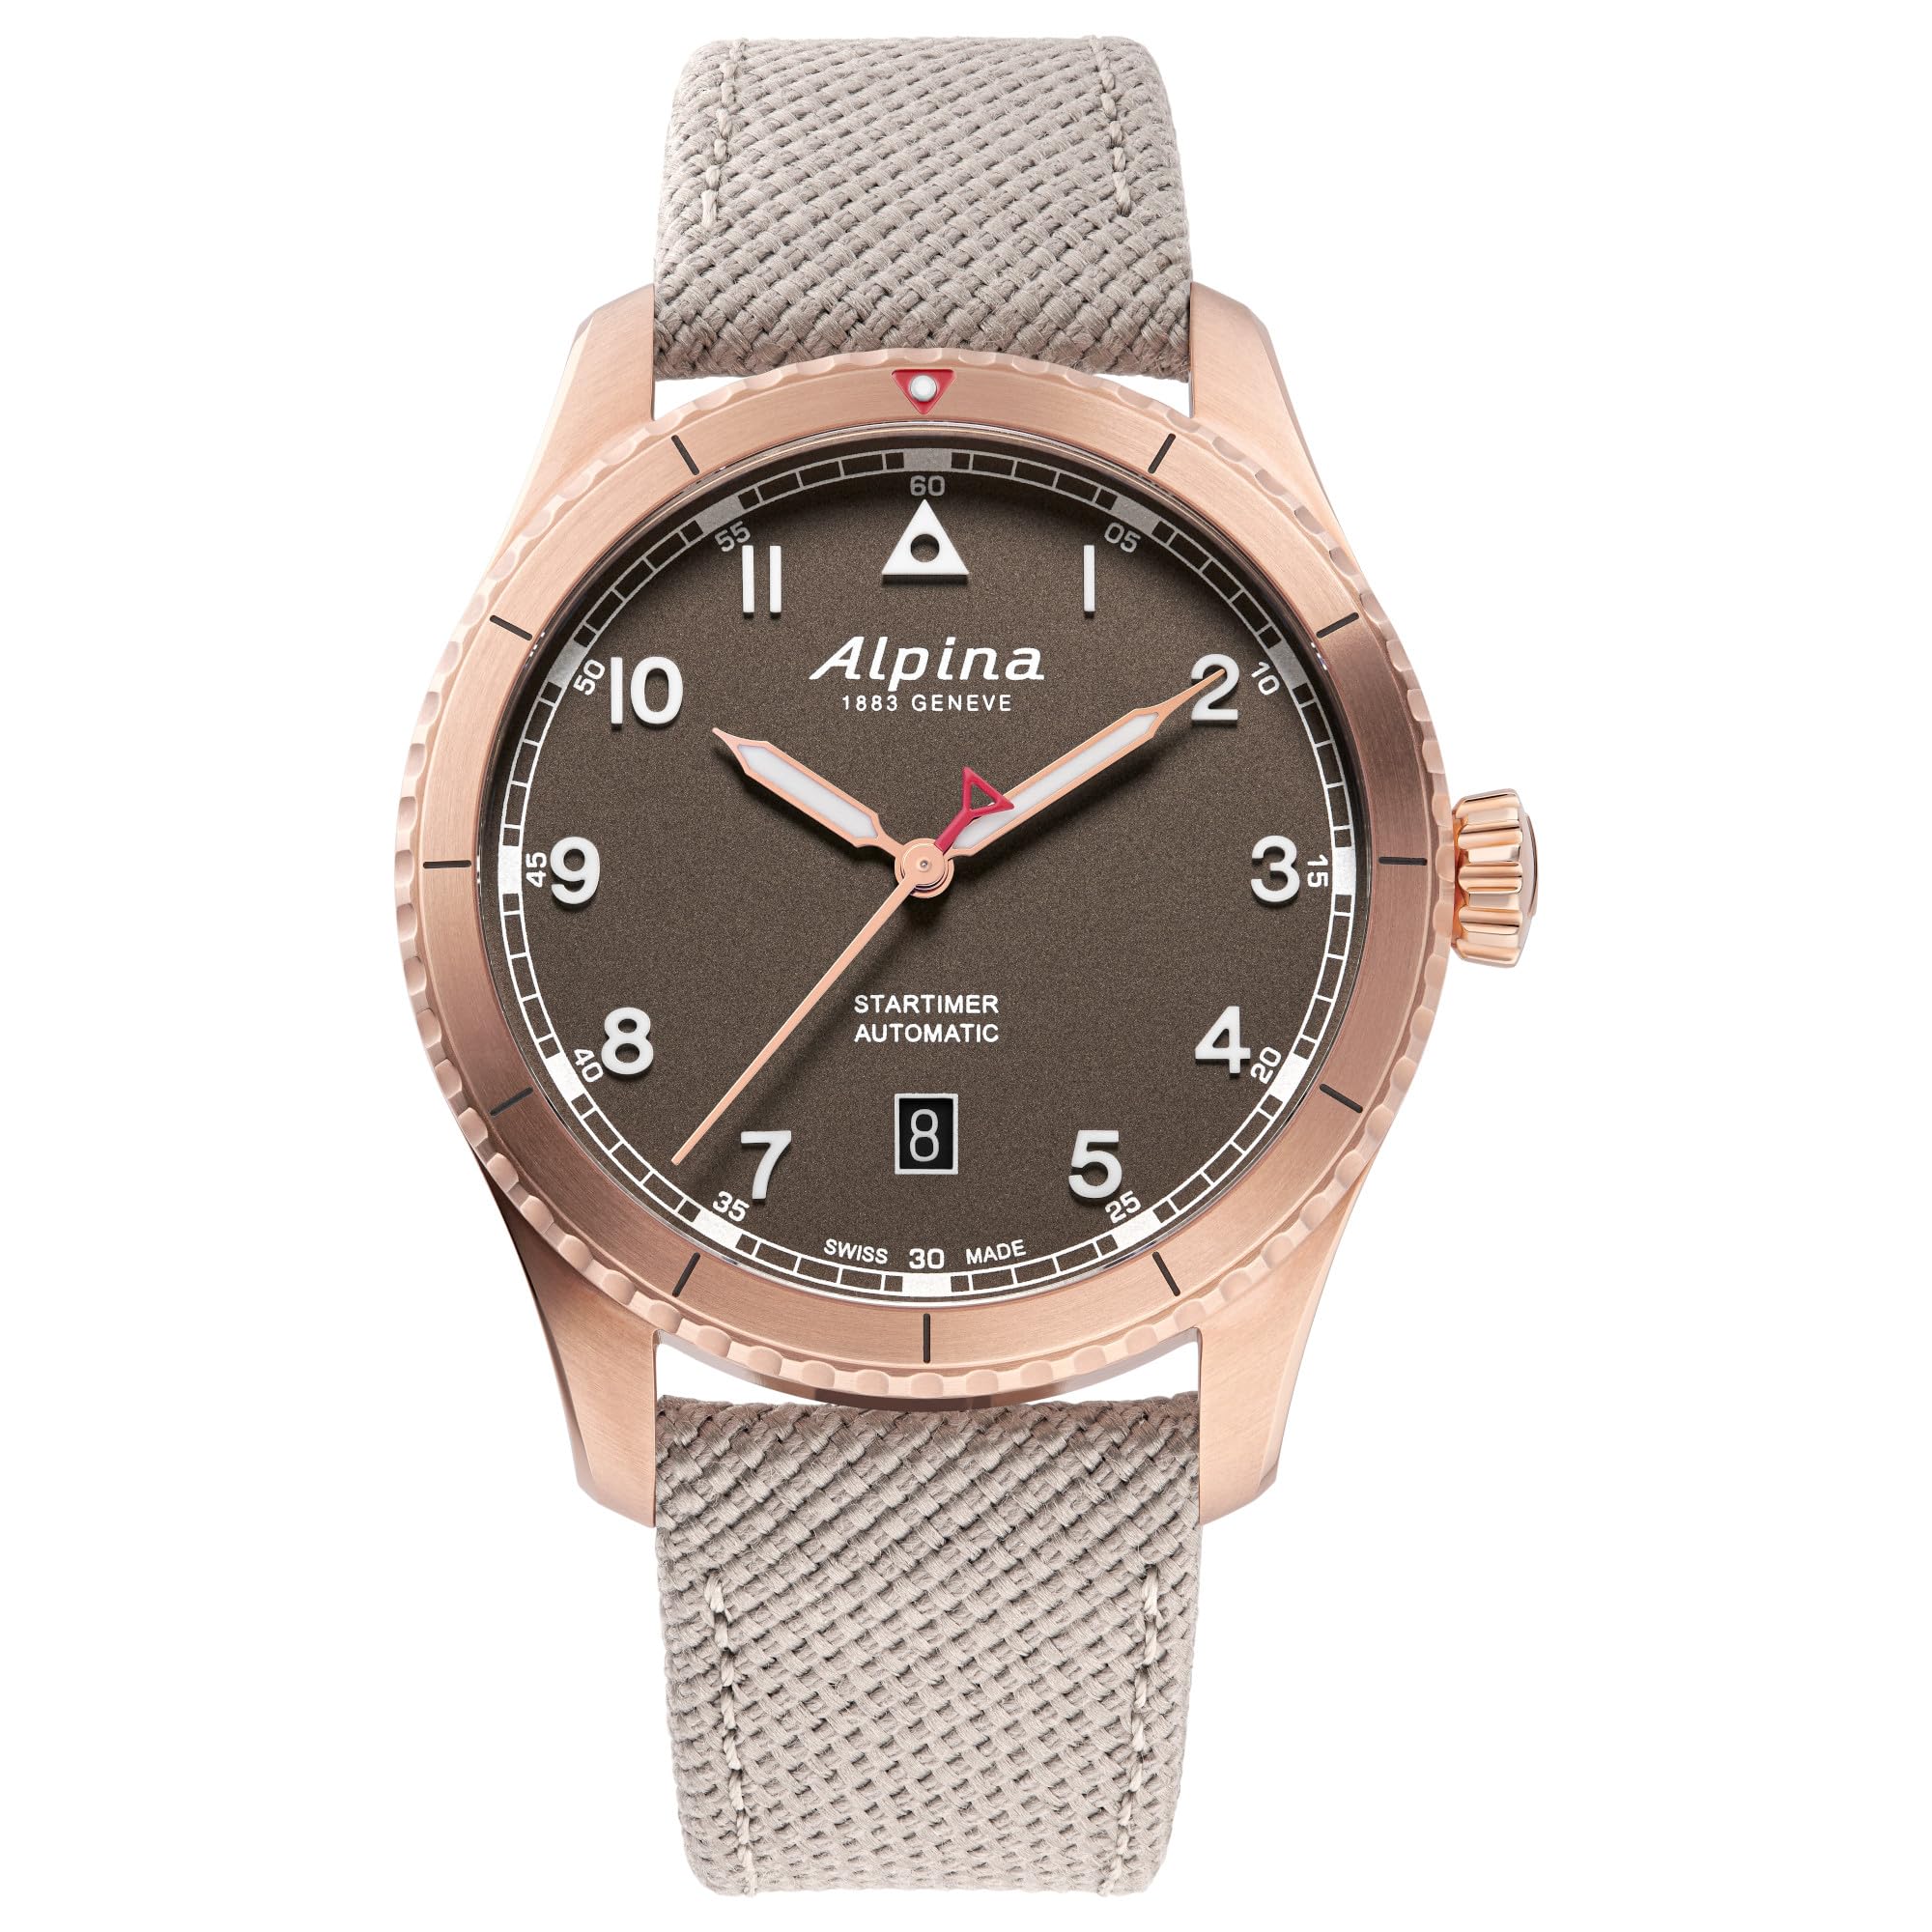 Alpina Men's Startimer Swiss Automatic 3-Hand Rose Gold Stainless Steel Case with Beige Leather Strap Watch, Brown Dial (Model: AL-525BR4S24)